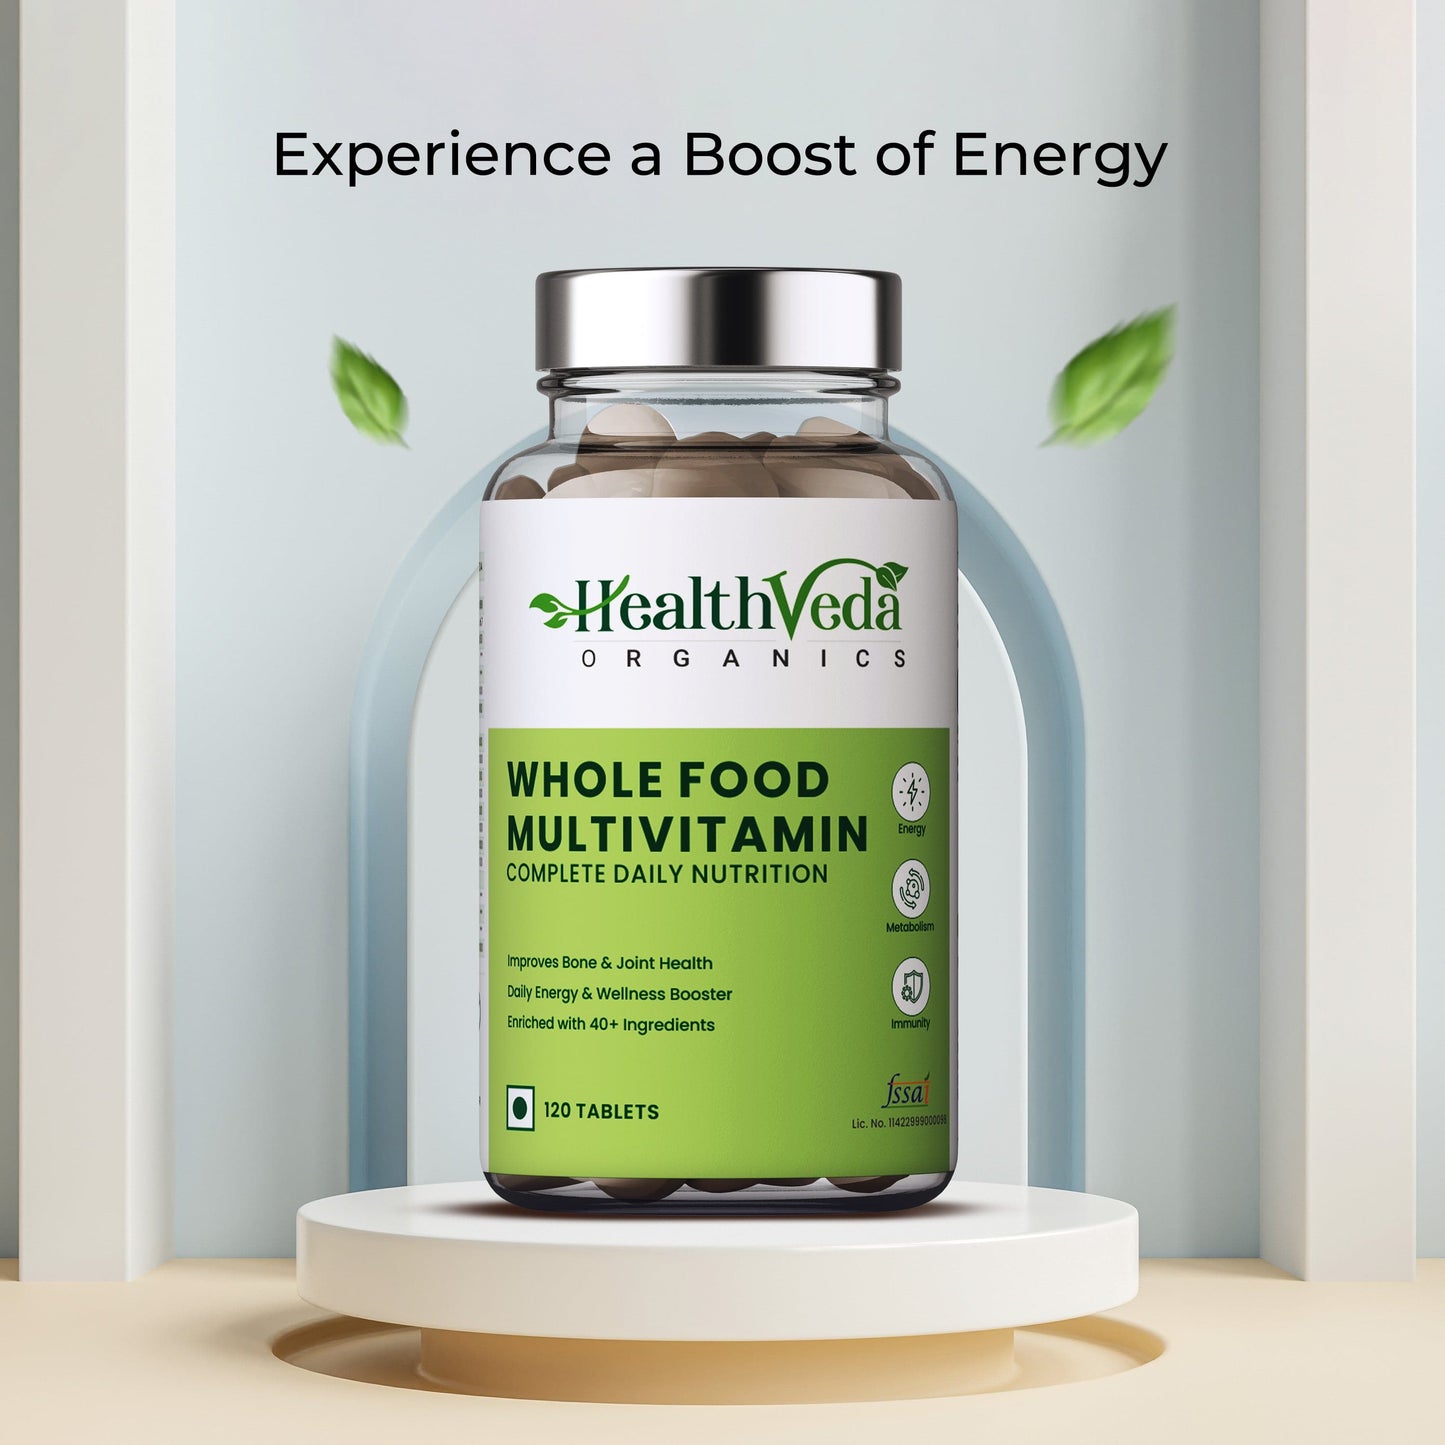 Health Veda Organics Whole Food Multivitamin with Natural Vitamins & Minerals I 120 Veg Tablets I Best for Energy, Brain, Heart & Eye Health I For both Men & Women